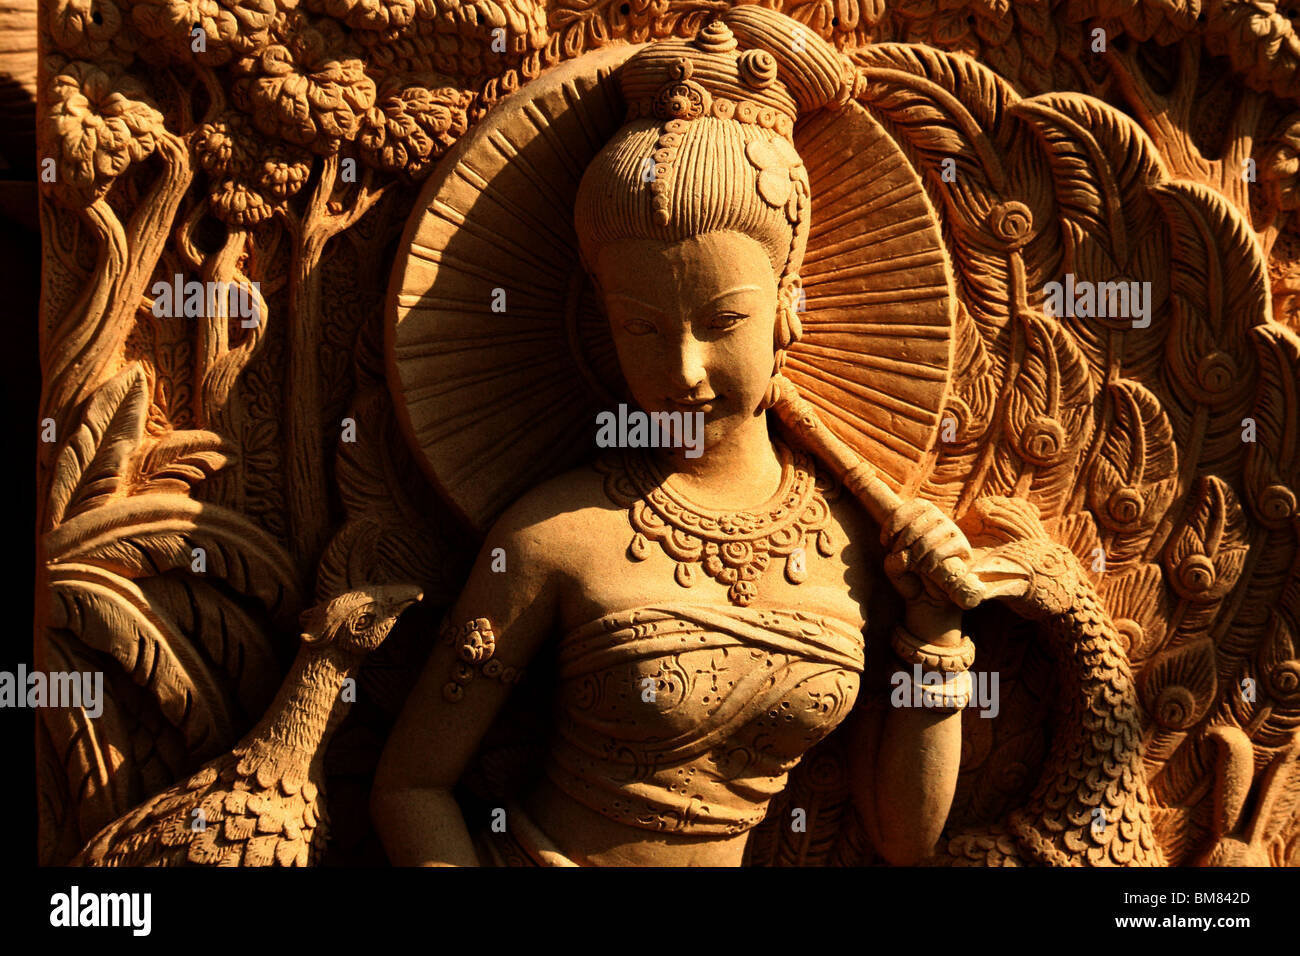 Stone statue of a lady  for sale in a shop in Pattaya, Thailand. Stock Photo